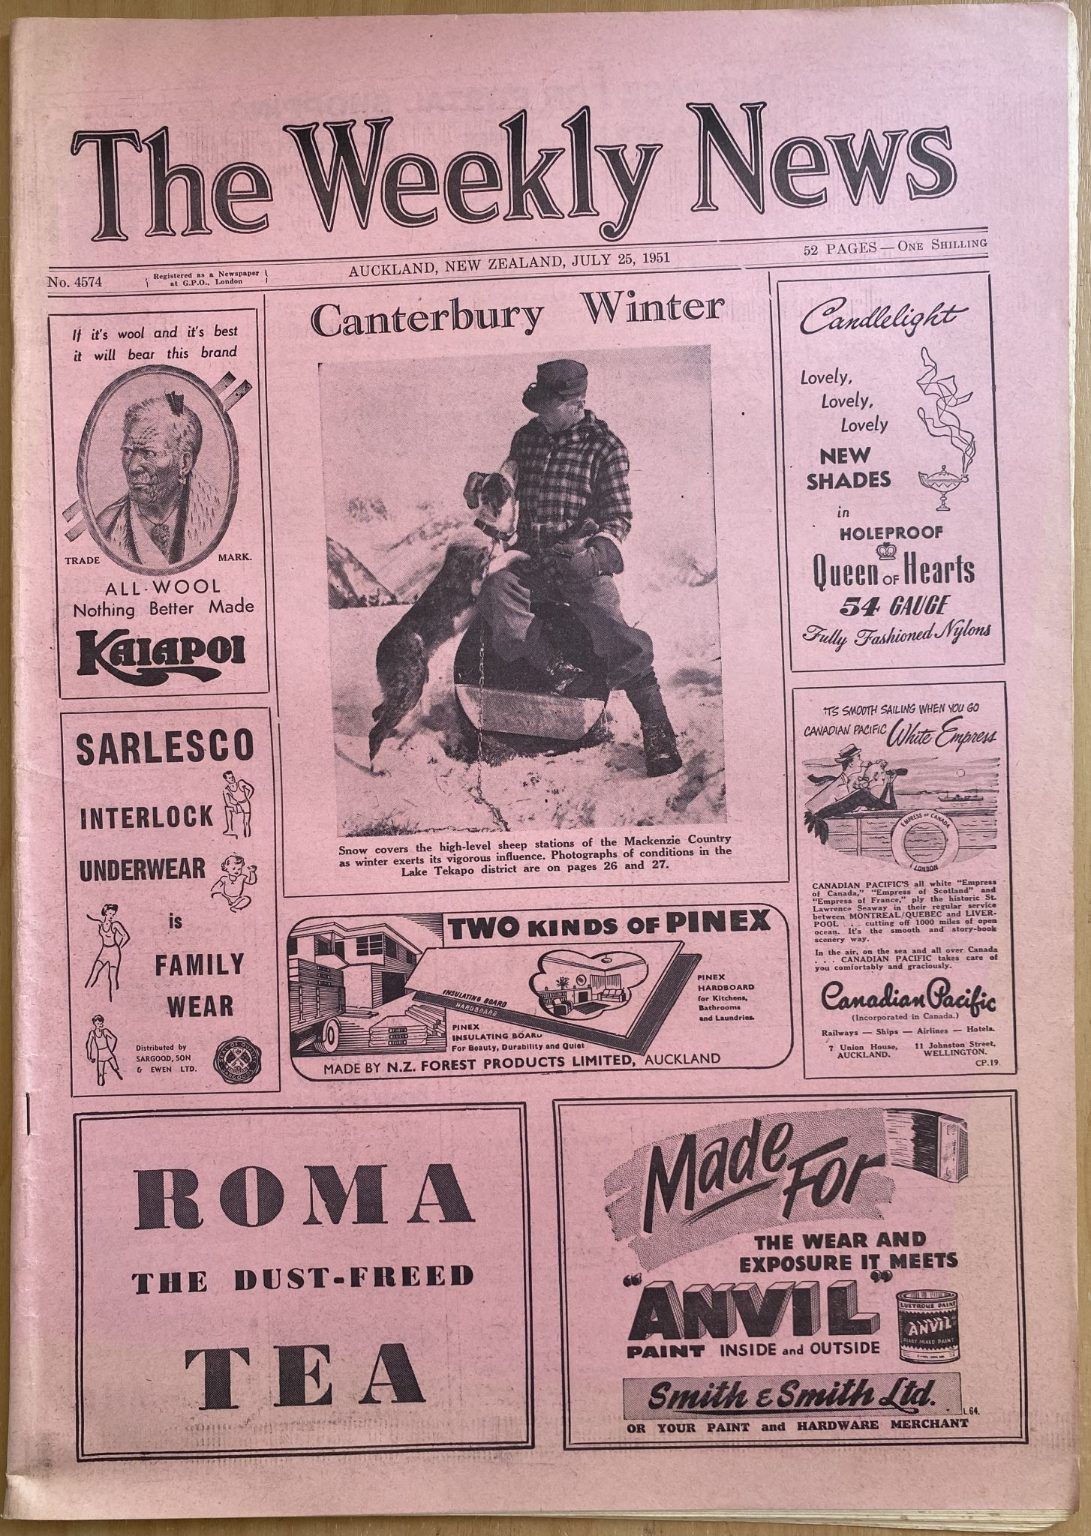 OLD NEWSPAPER: The Weekly News, No. 4574, 25 July 1951